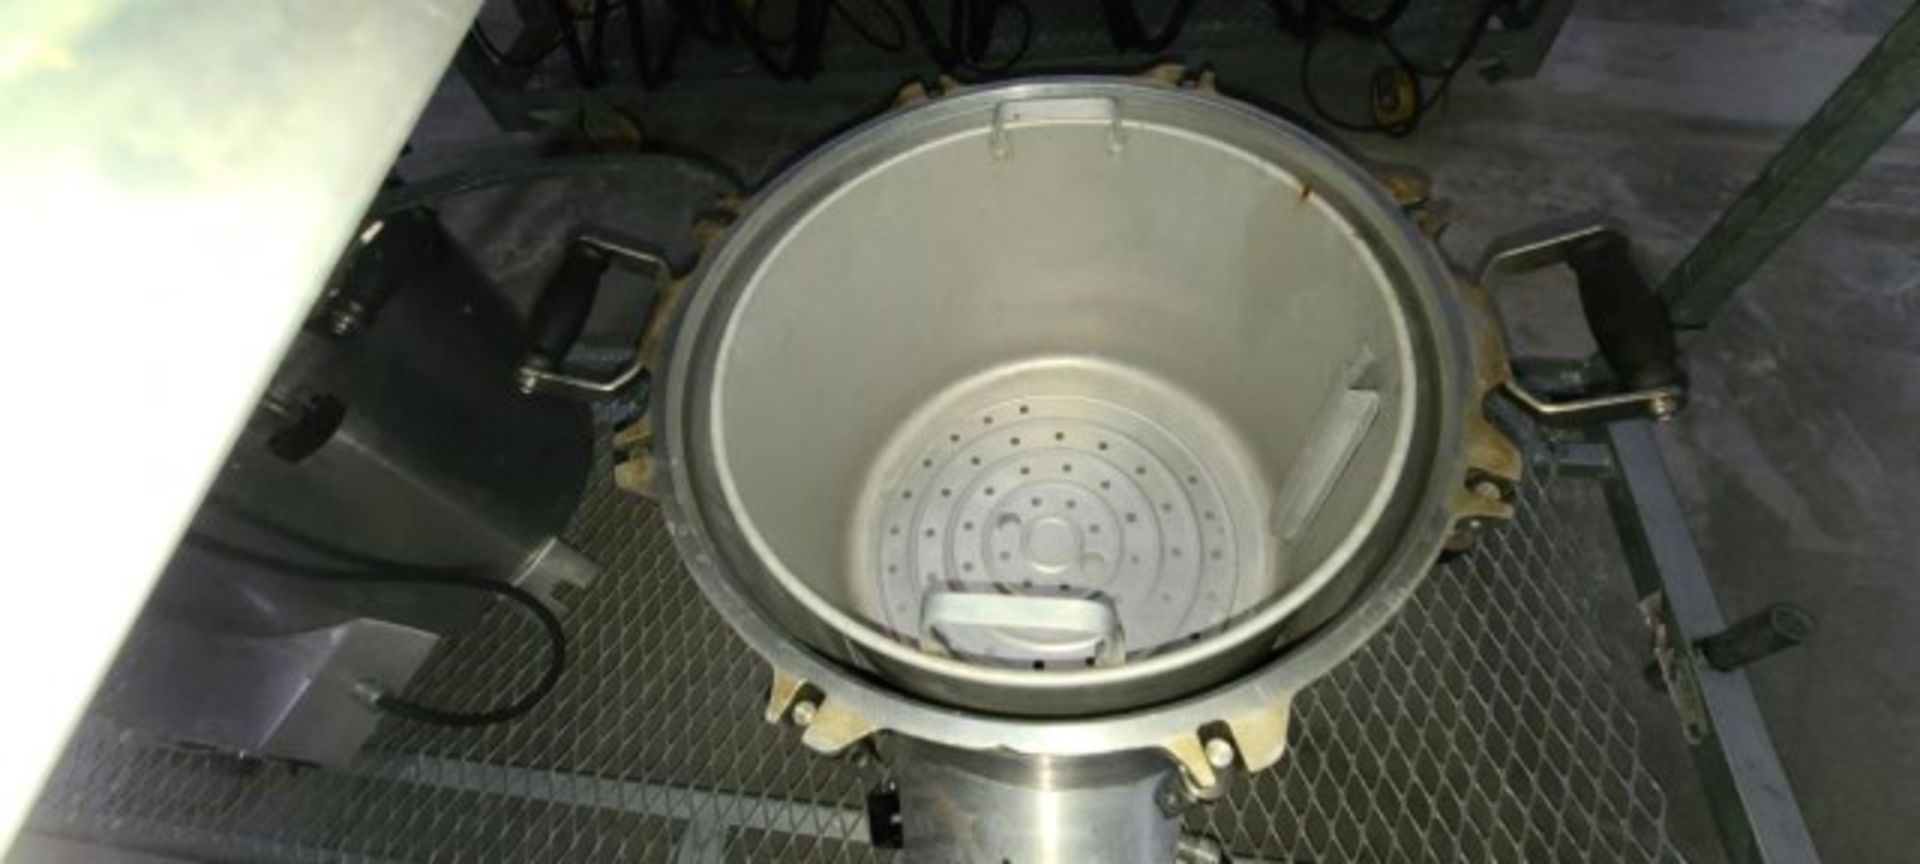 Autoclave - Image 5 of 6